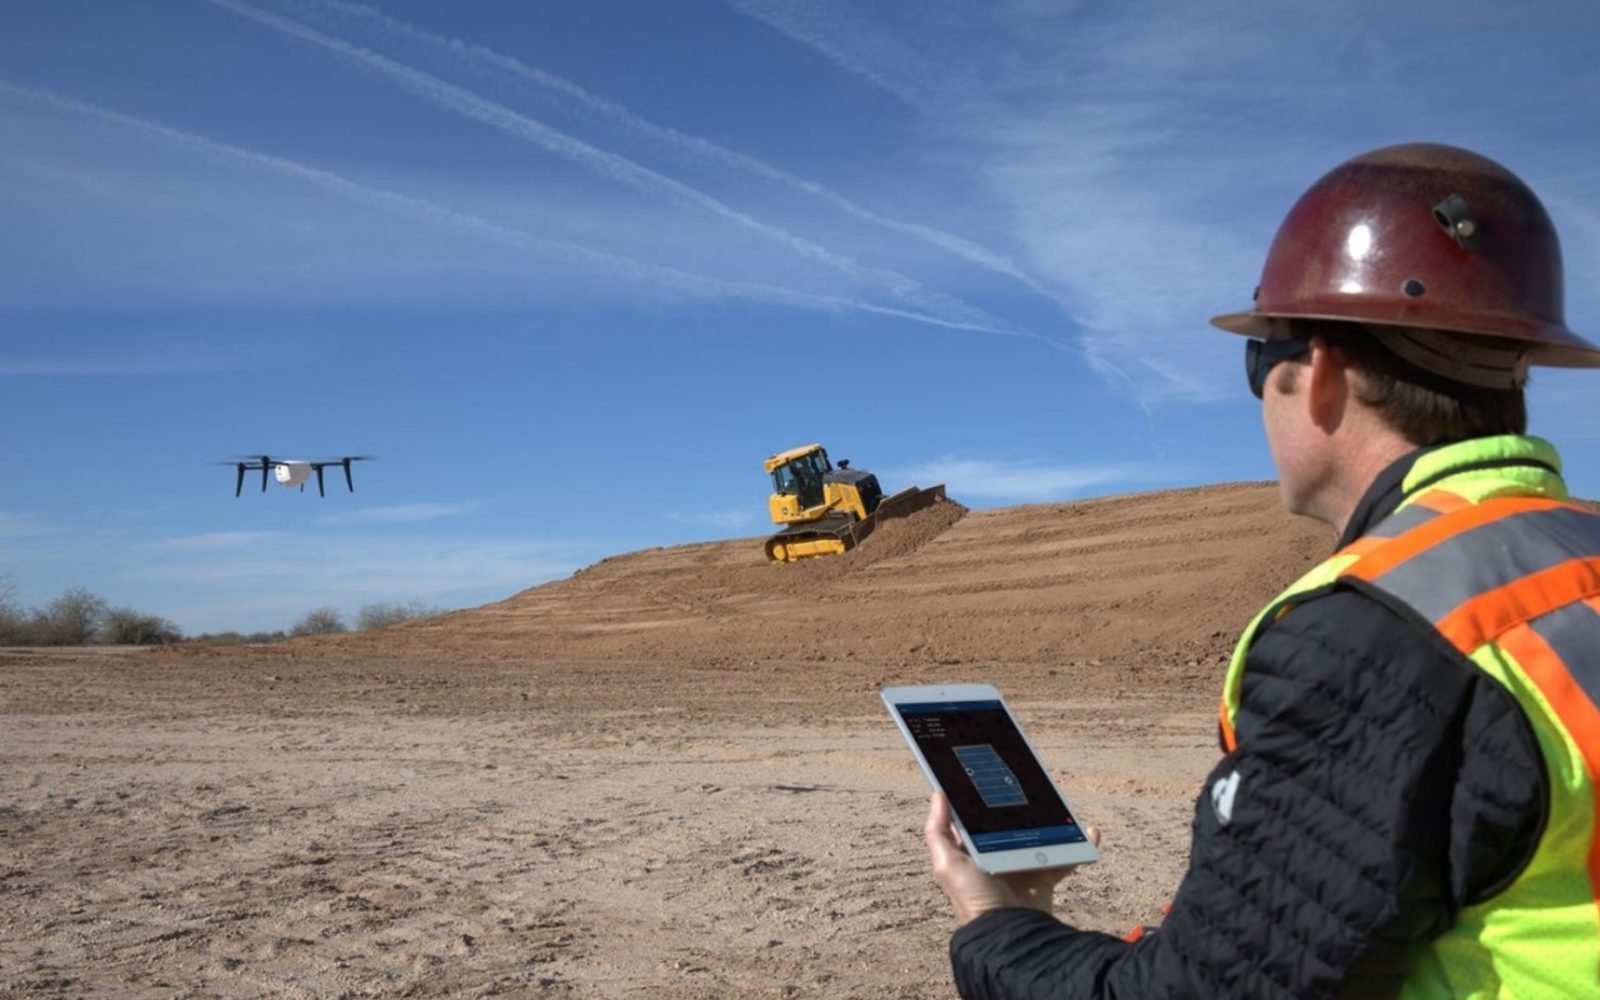 FAA is significantly behind on implementing Remote ID for drones